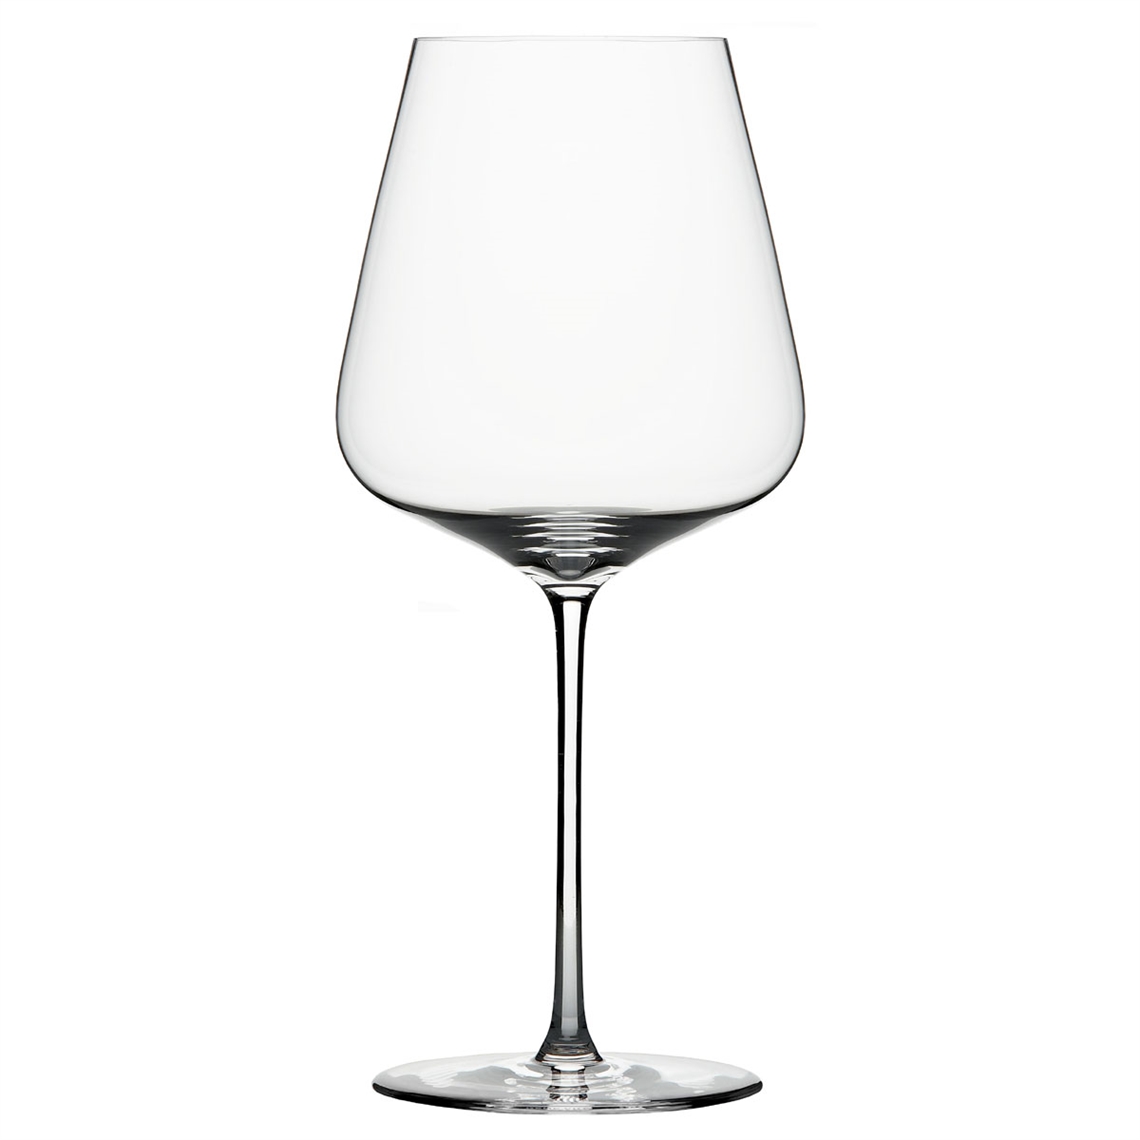 View more shiraz and syrah wine glasses from our Premium Mouth Blown Glassware range